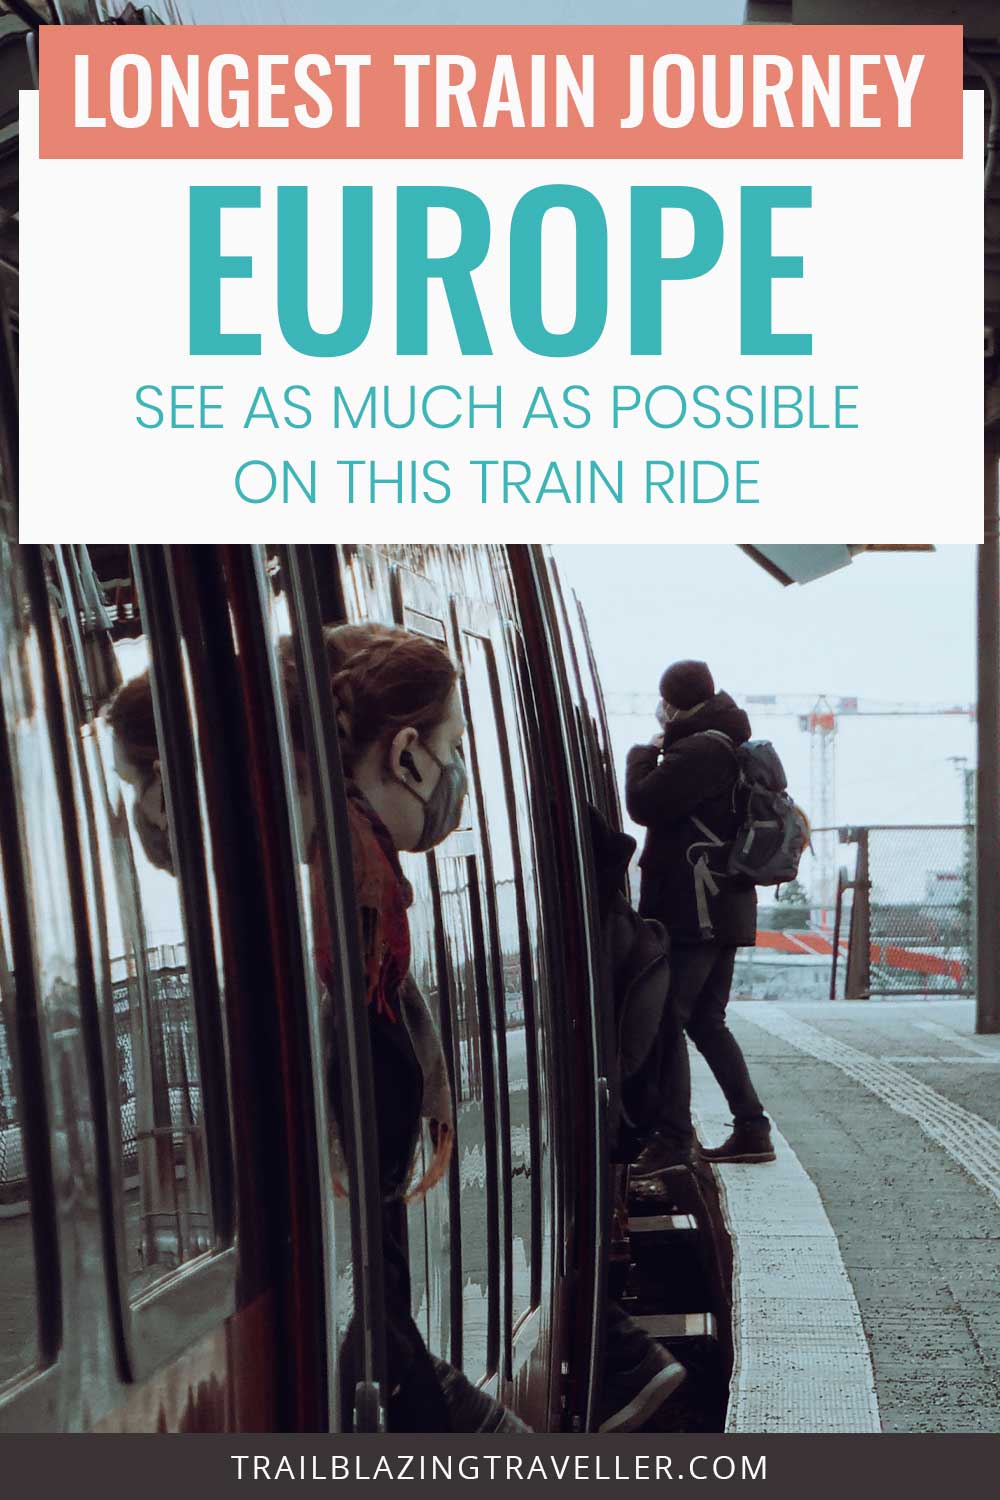 Girl getting out of a train - Longest Train Journey Europe?